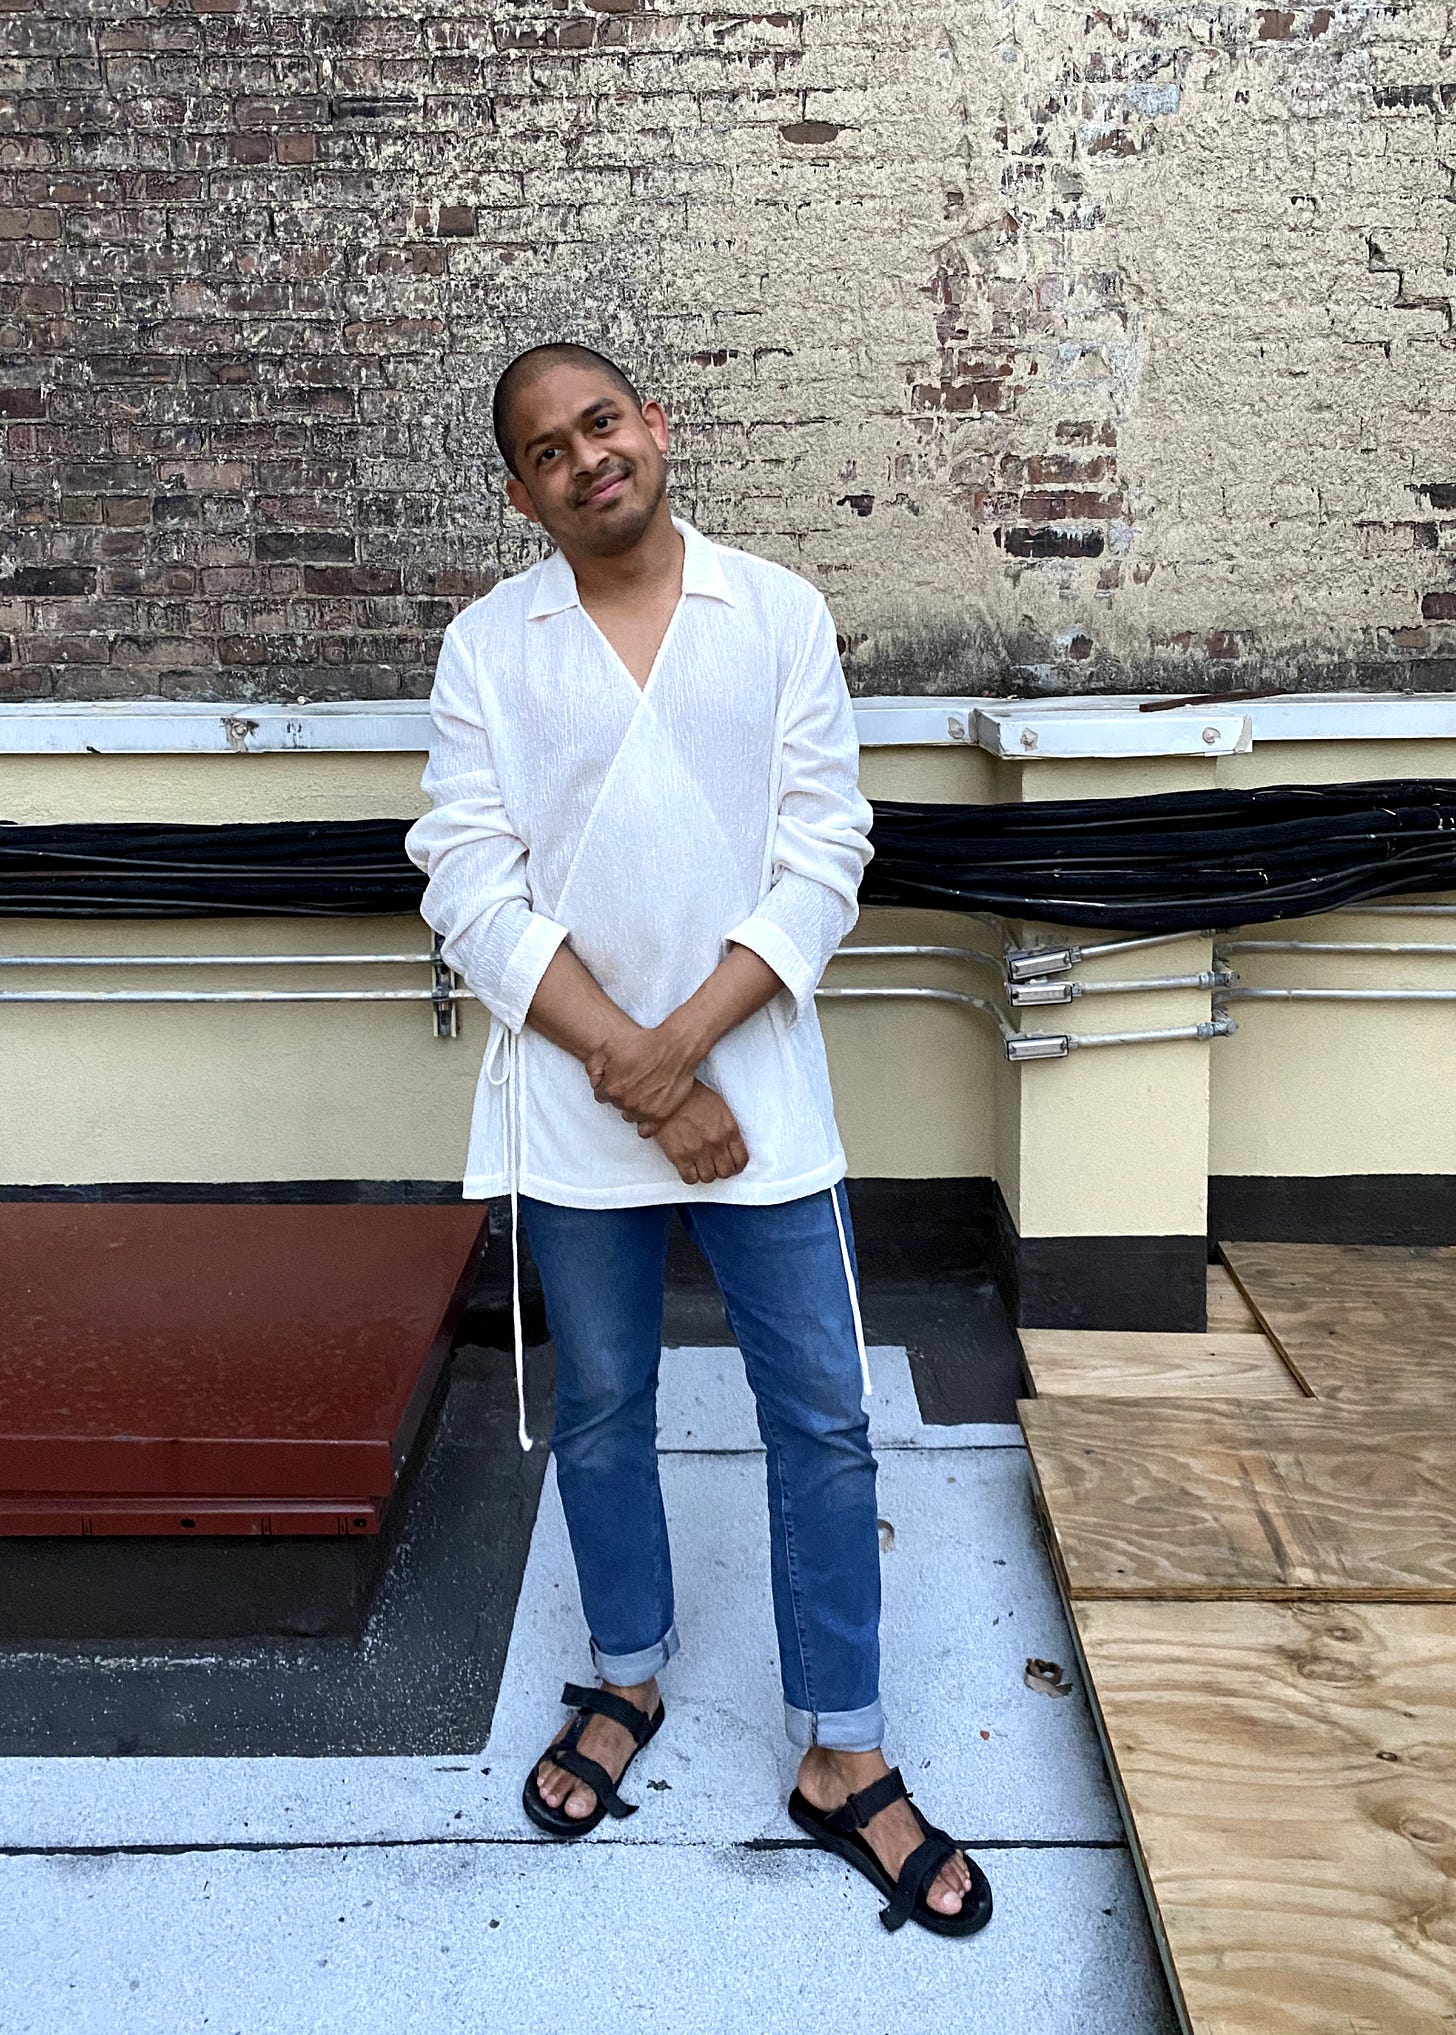 Kirk Fernandes standing in white shirt and sandals posing in front of a brick wall.